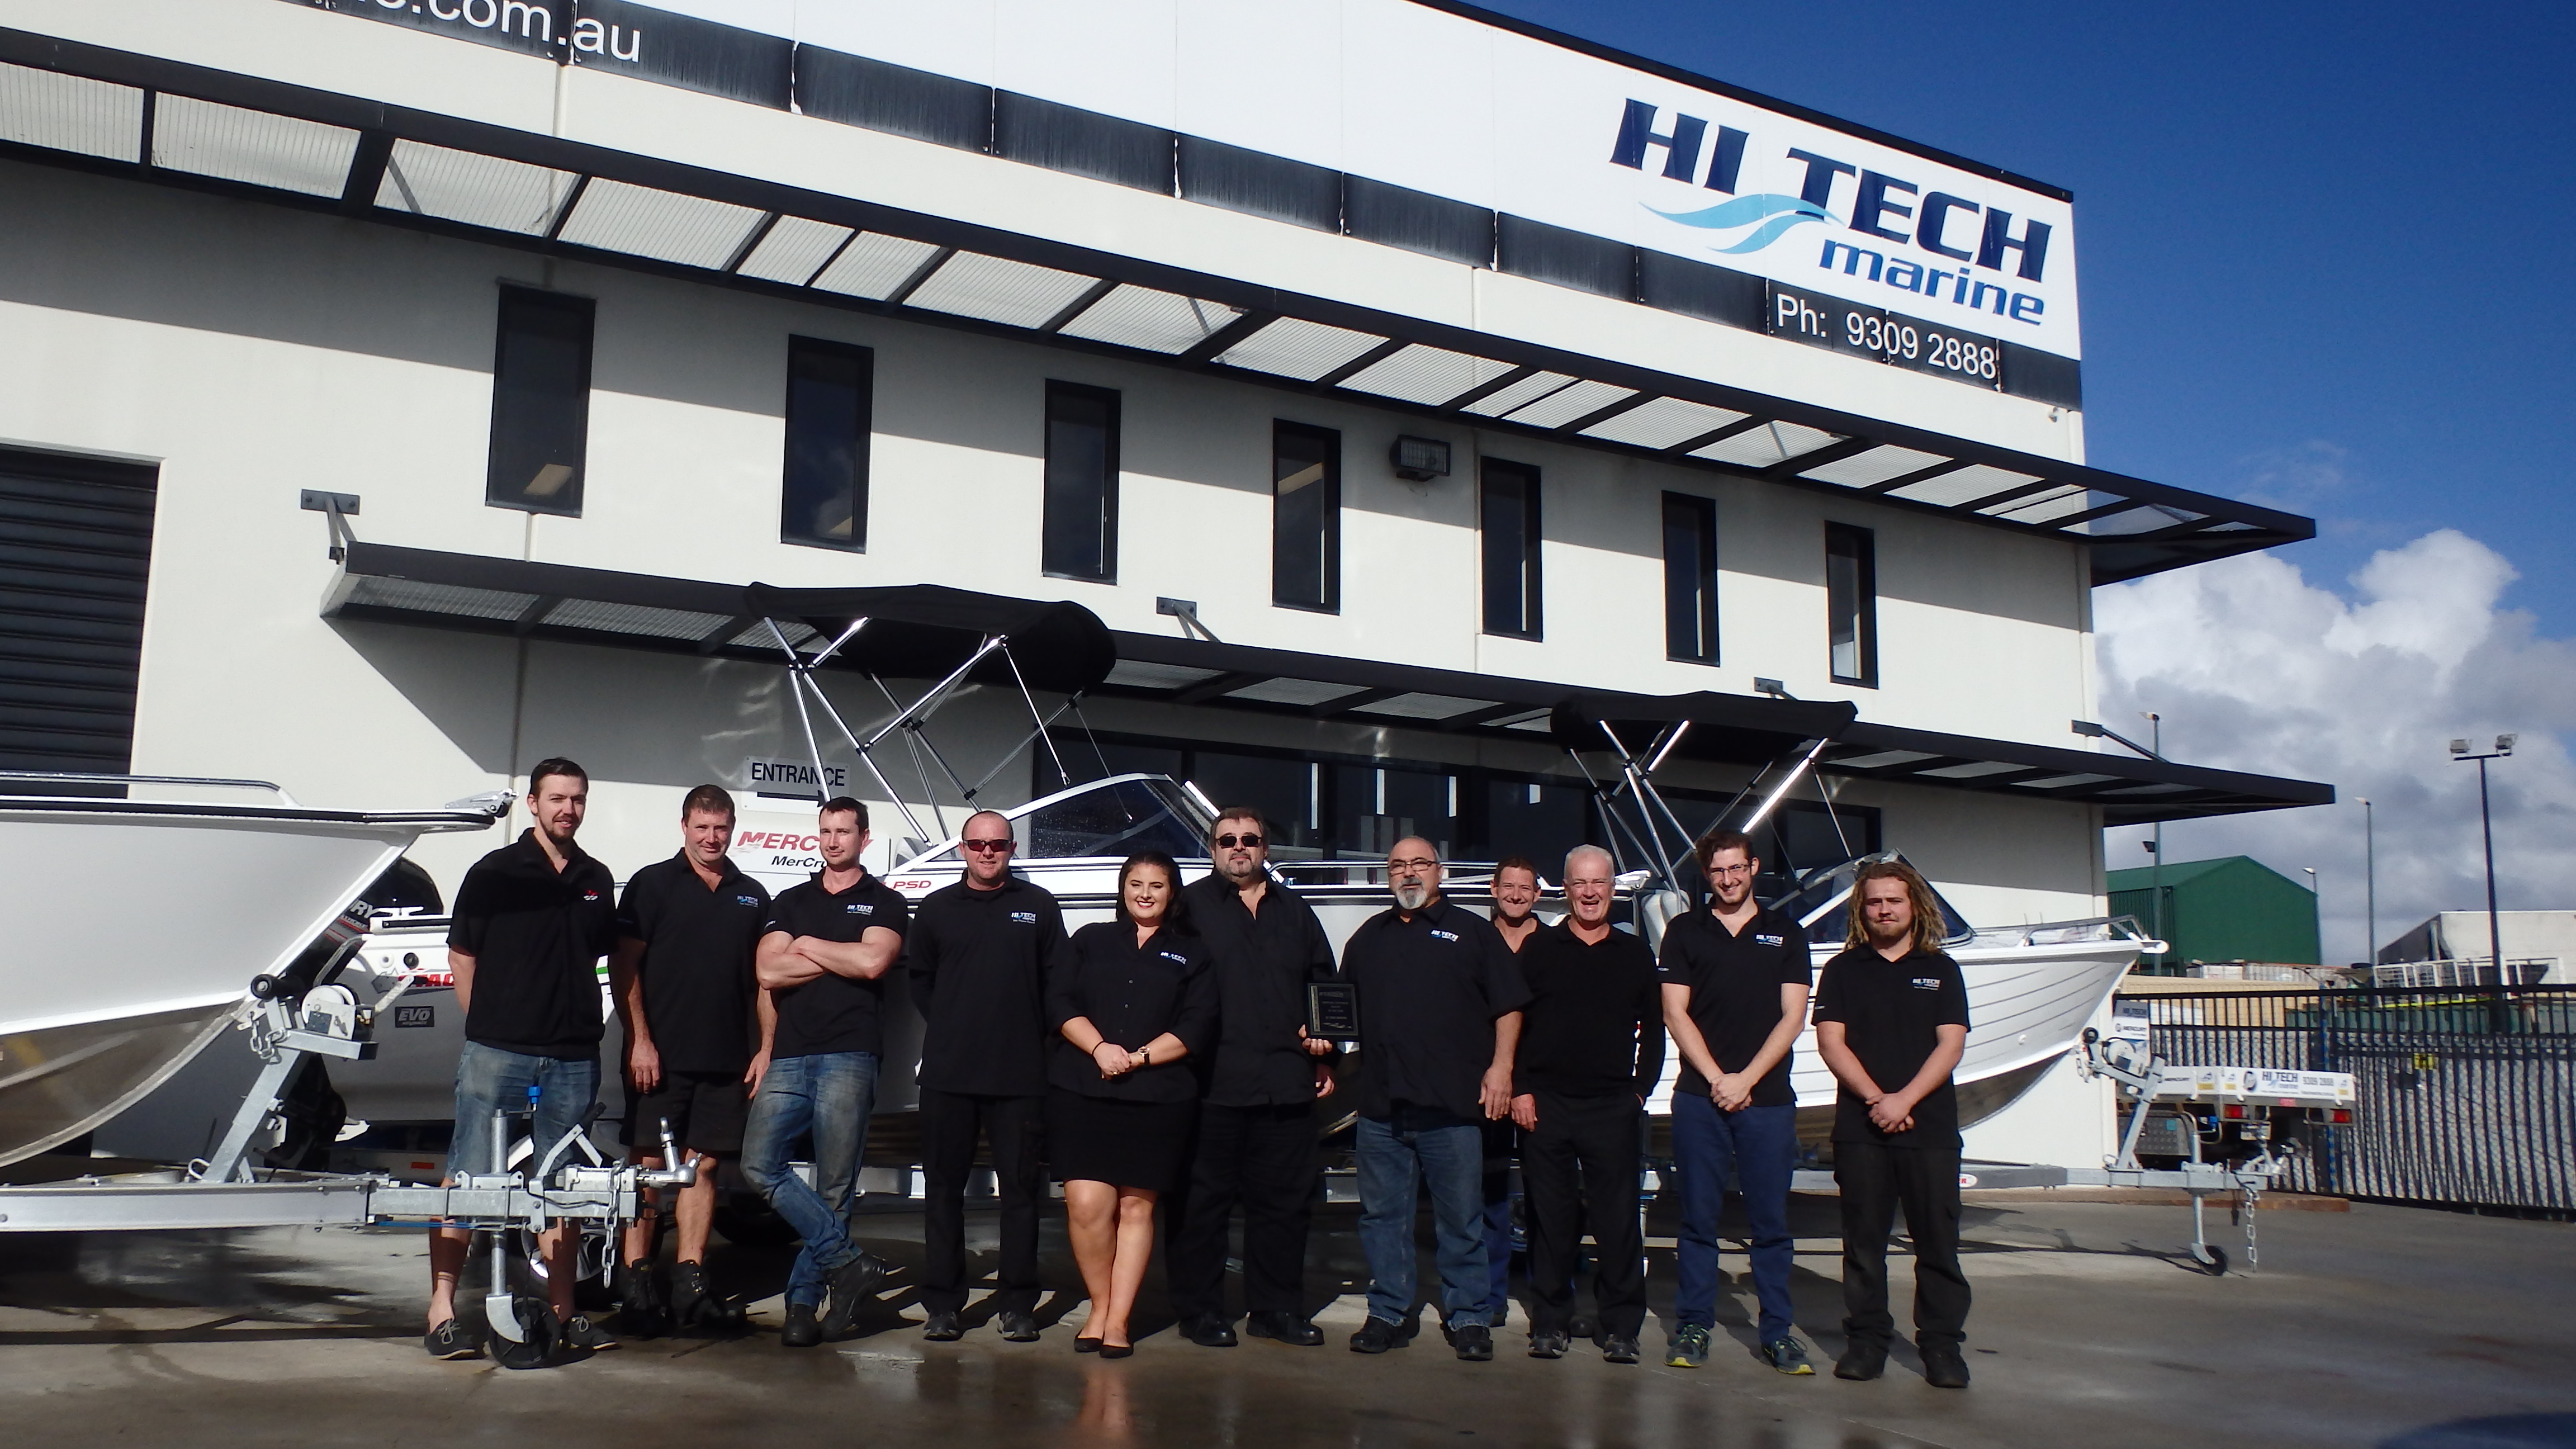 Hitech Marine WA Stacer dealer of the year 2016/2017